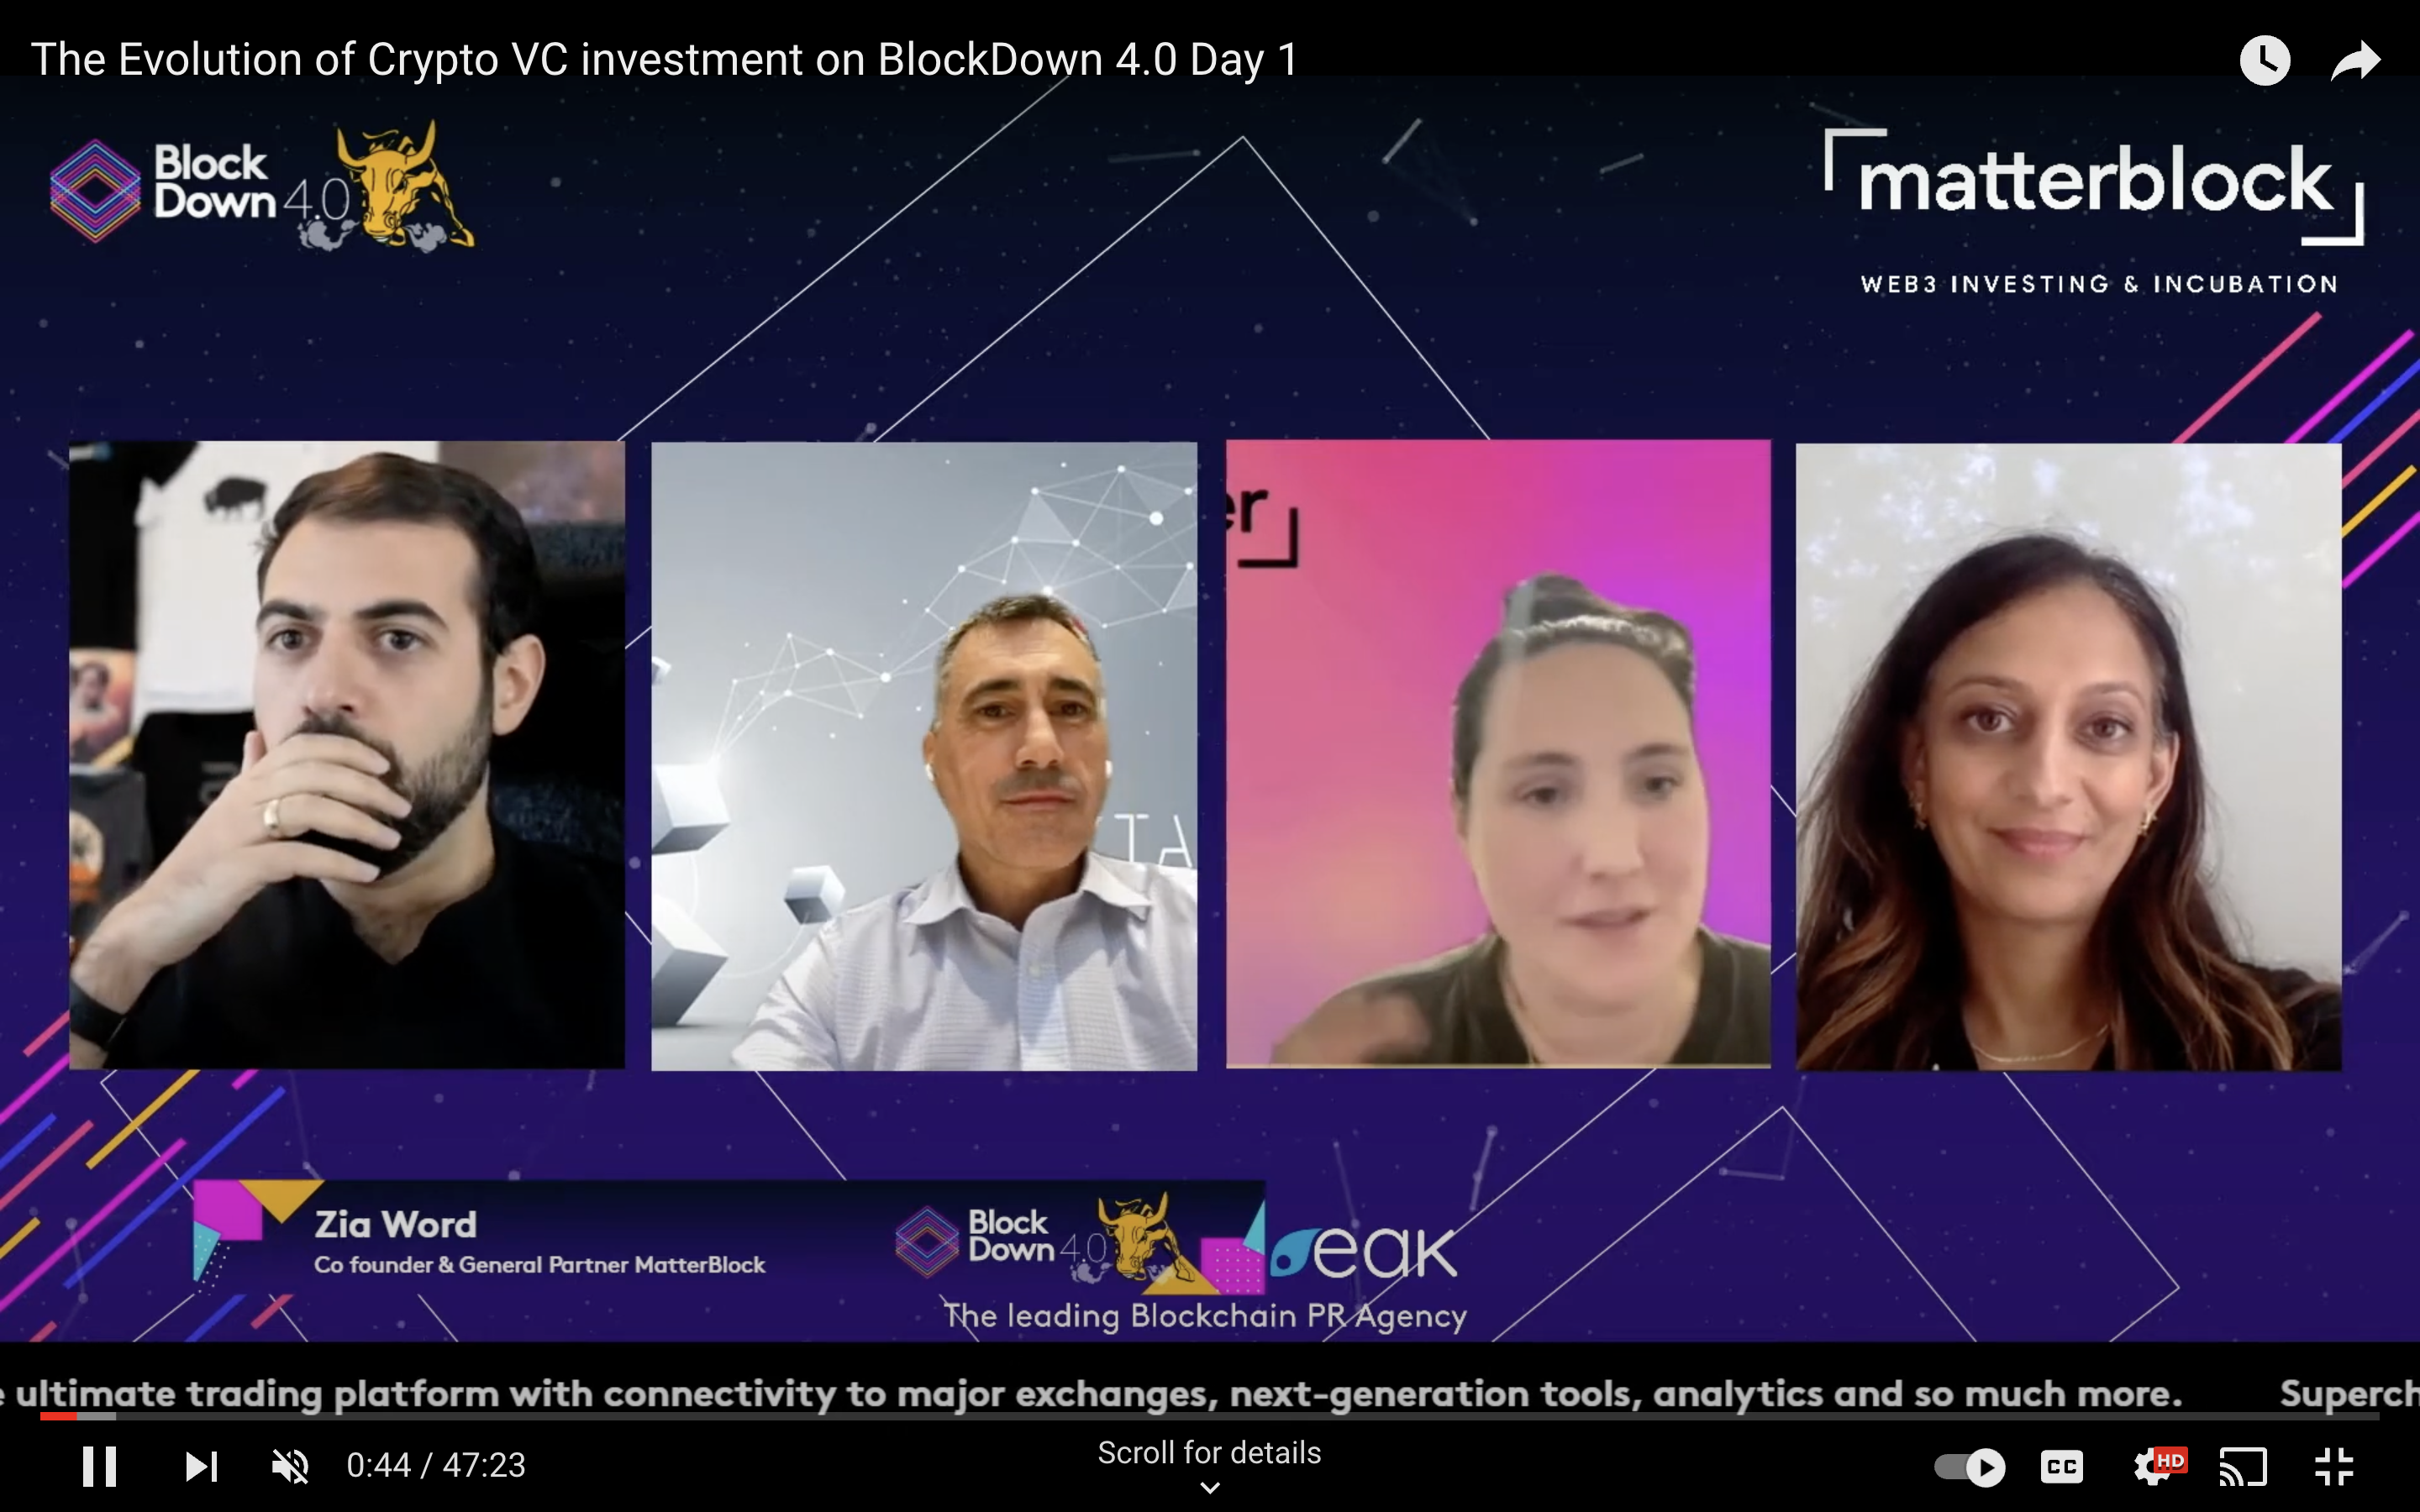 Apr 2021 The Evolution of Crypto VC investment on BlockDown 4.0